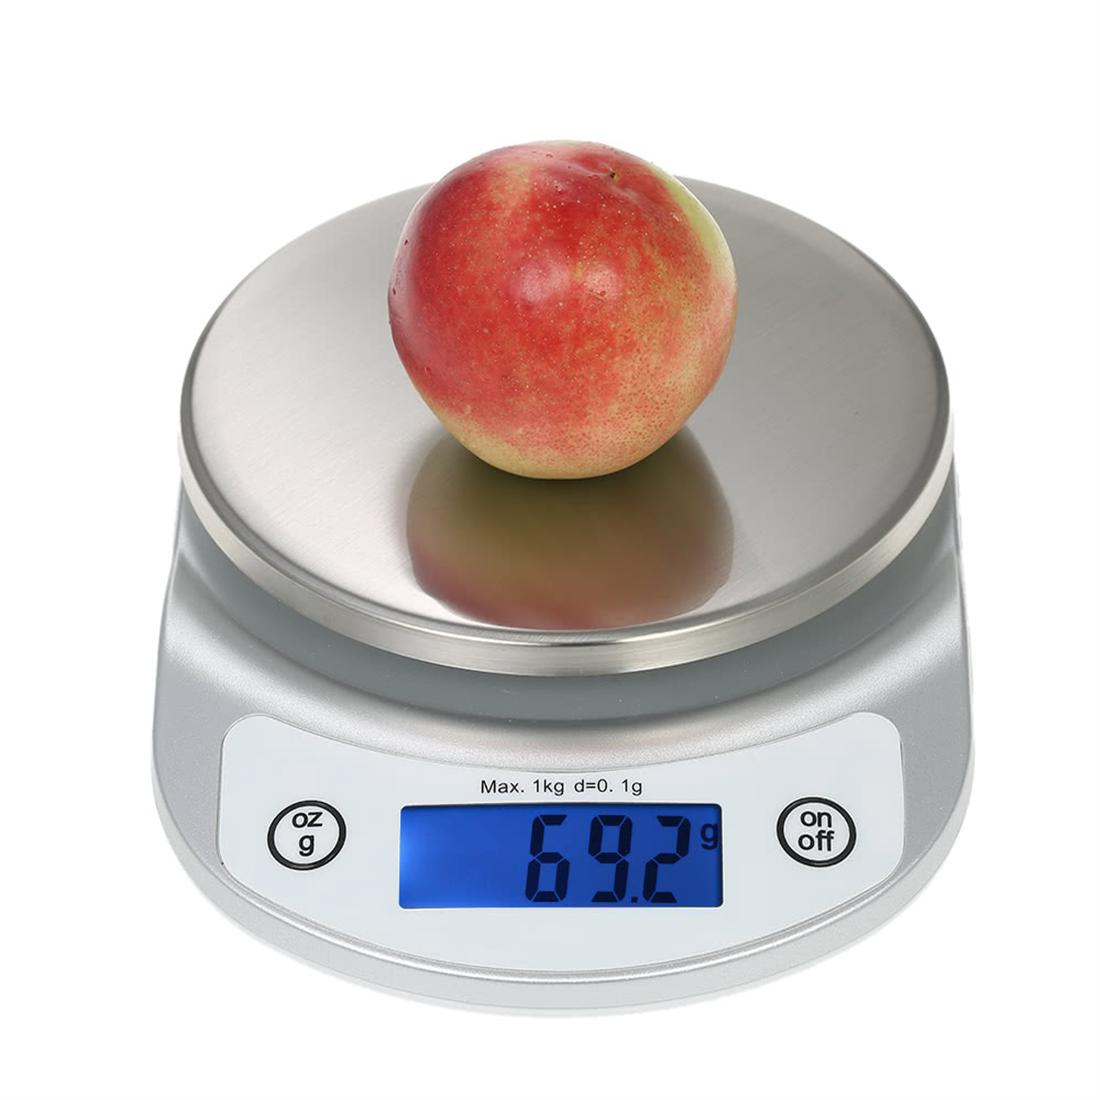 1kg/0.1g Accurate Kitchen Scale High (end 6/18/2021 3:23 AM)